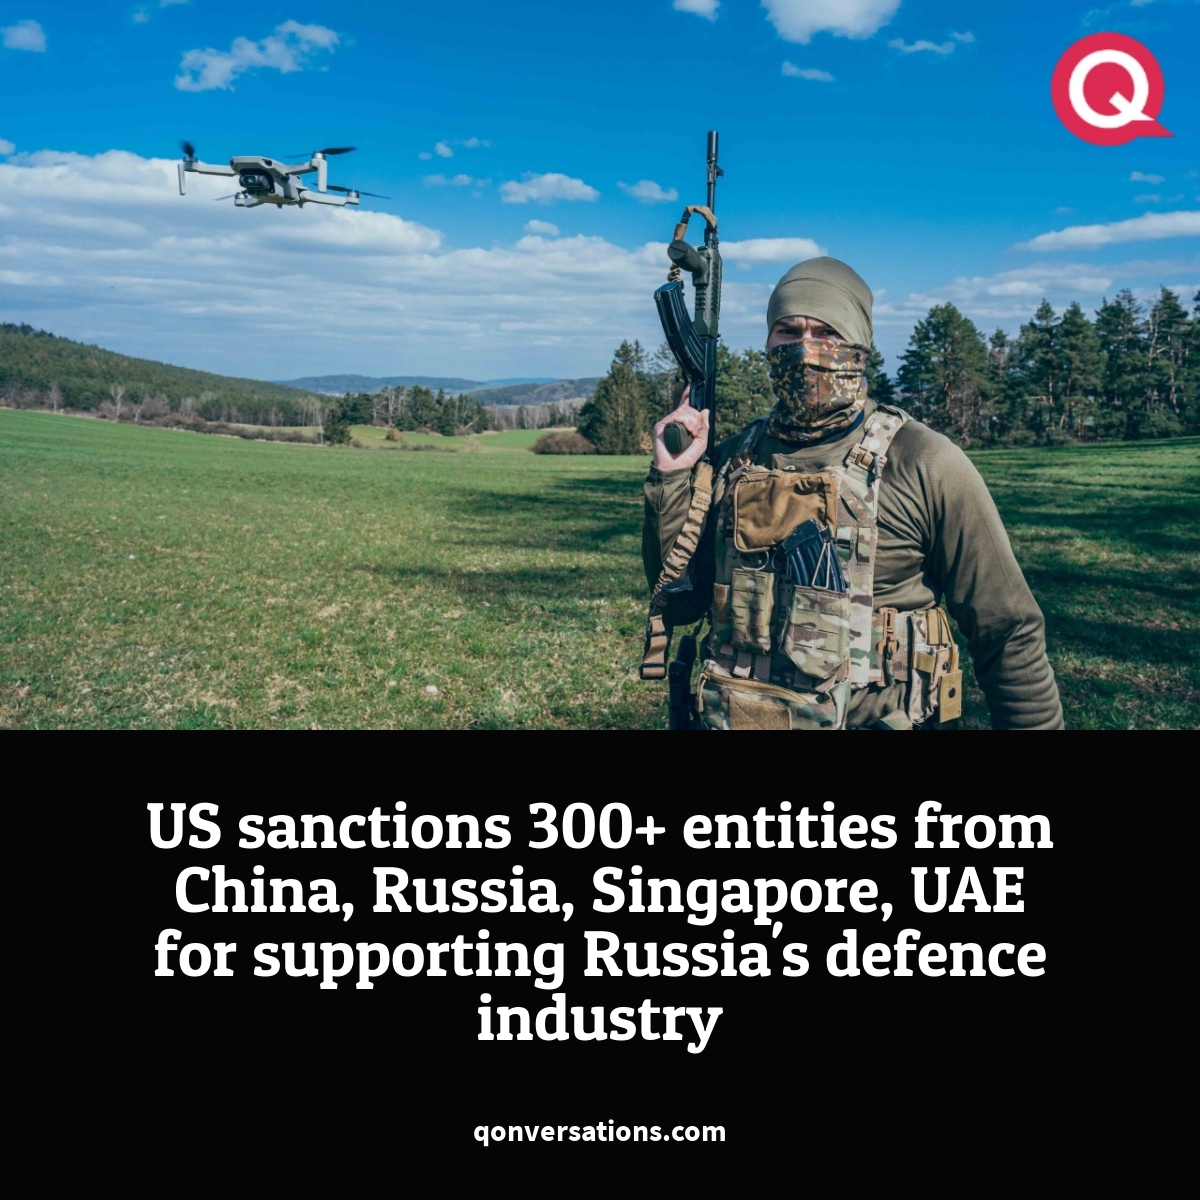 #military #china #Ukraine️ Find out more about the latest #US sanctions imposed on those who aid #Russia's defence industry: qonversations.com/us-sanctions-3…